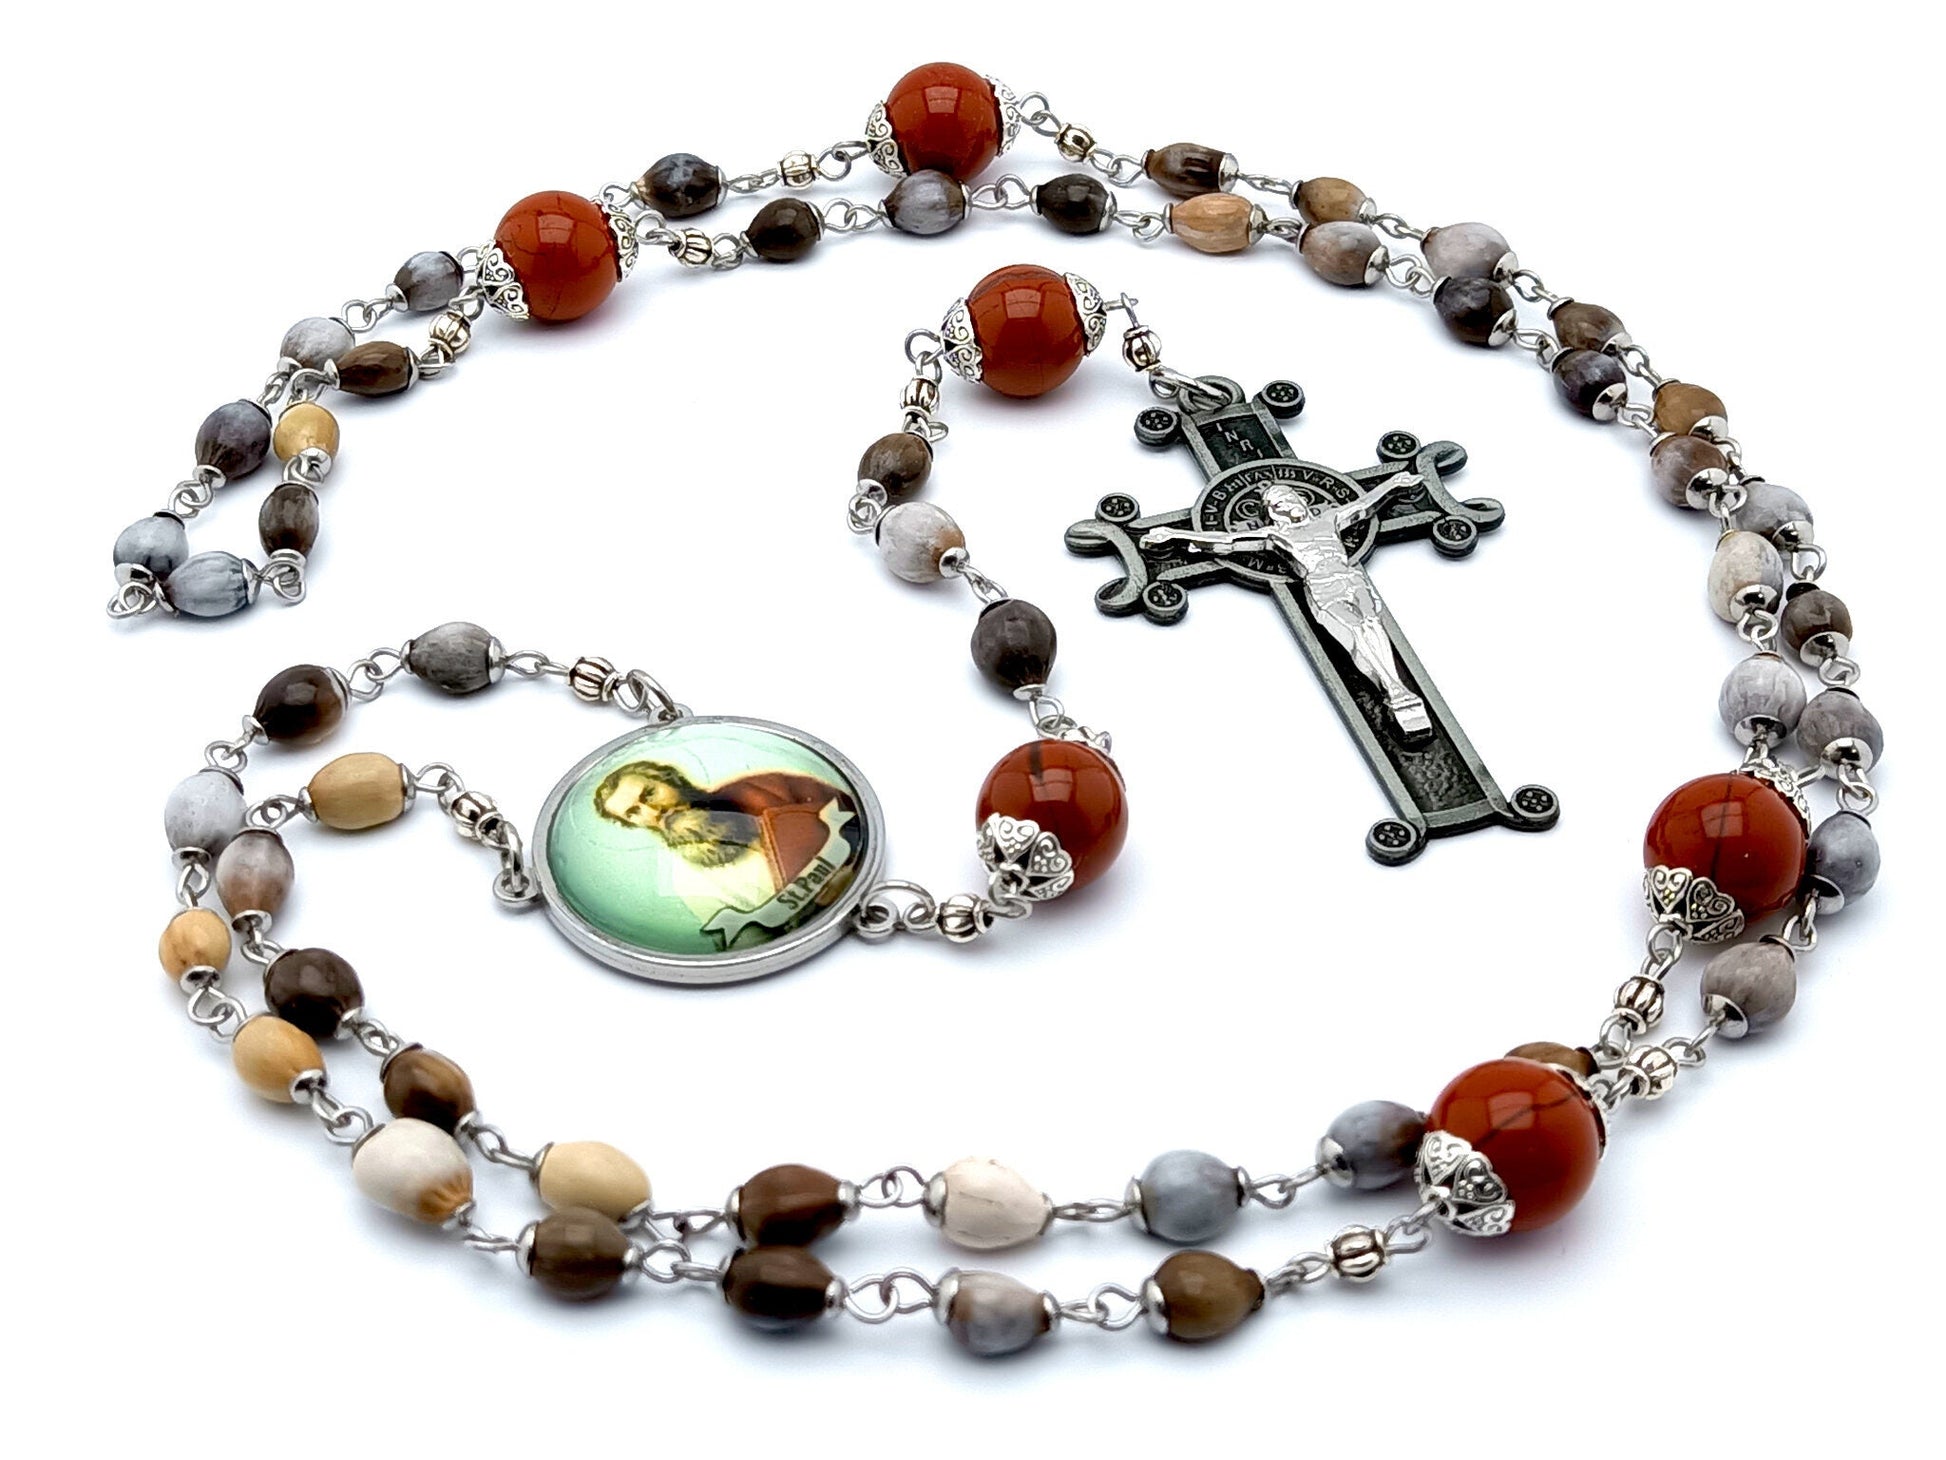 Saint Paul the Apostle unique rosary beads with jobs tears and red gemstone beads, black Saint Benedict crucifix and stainless steel picture centre medal. 